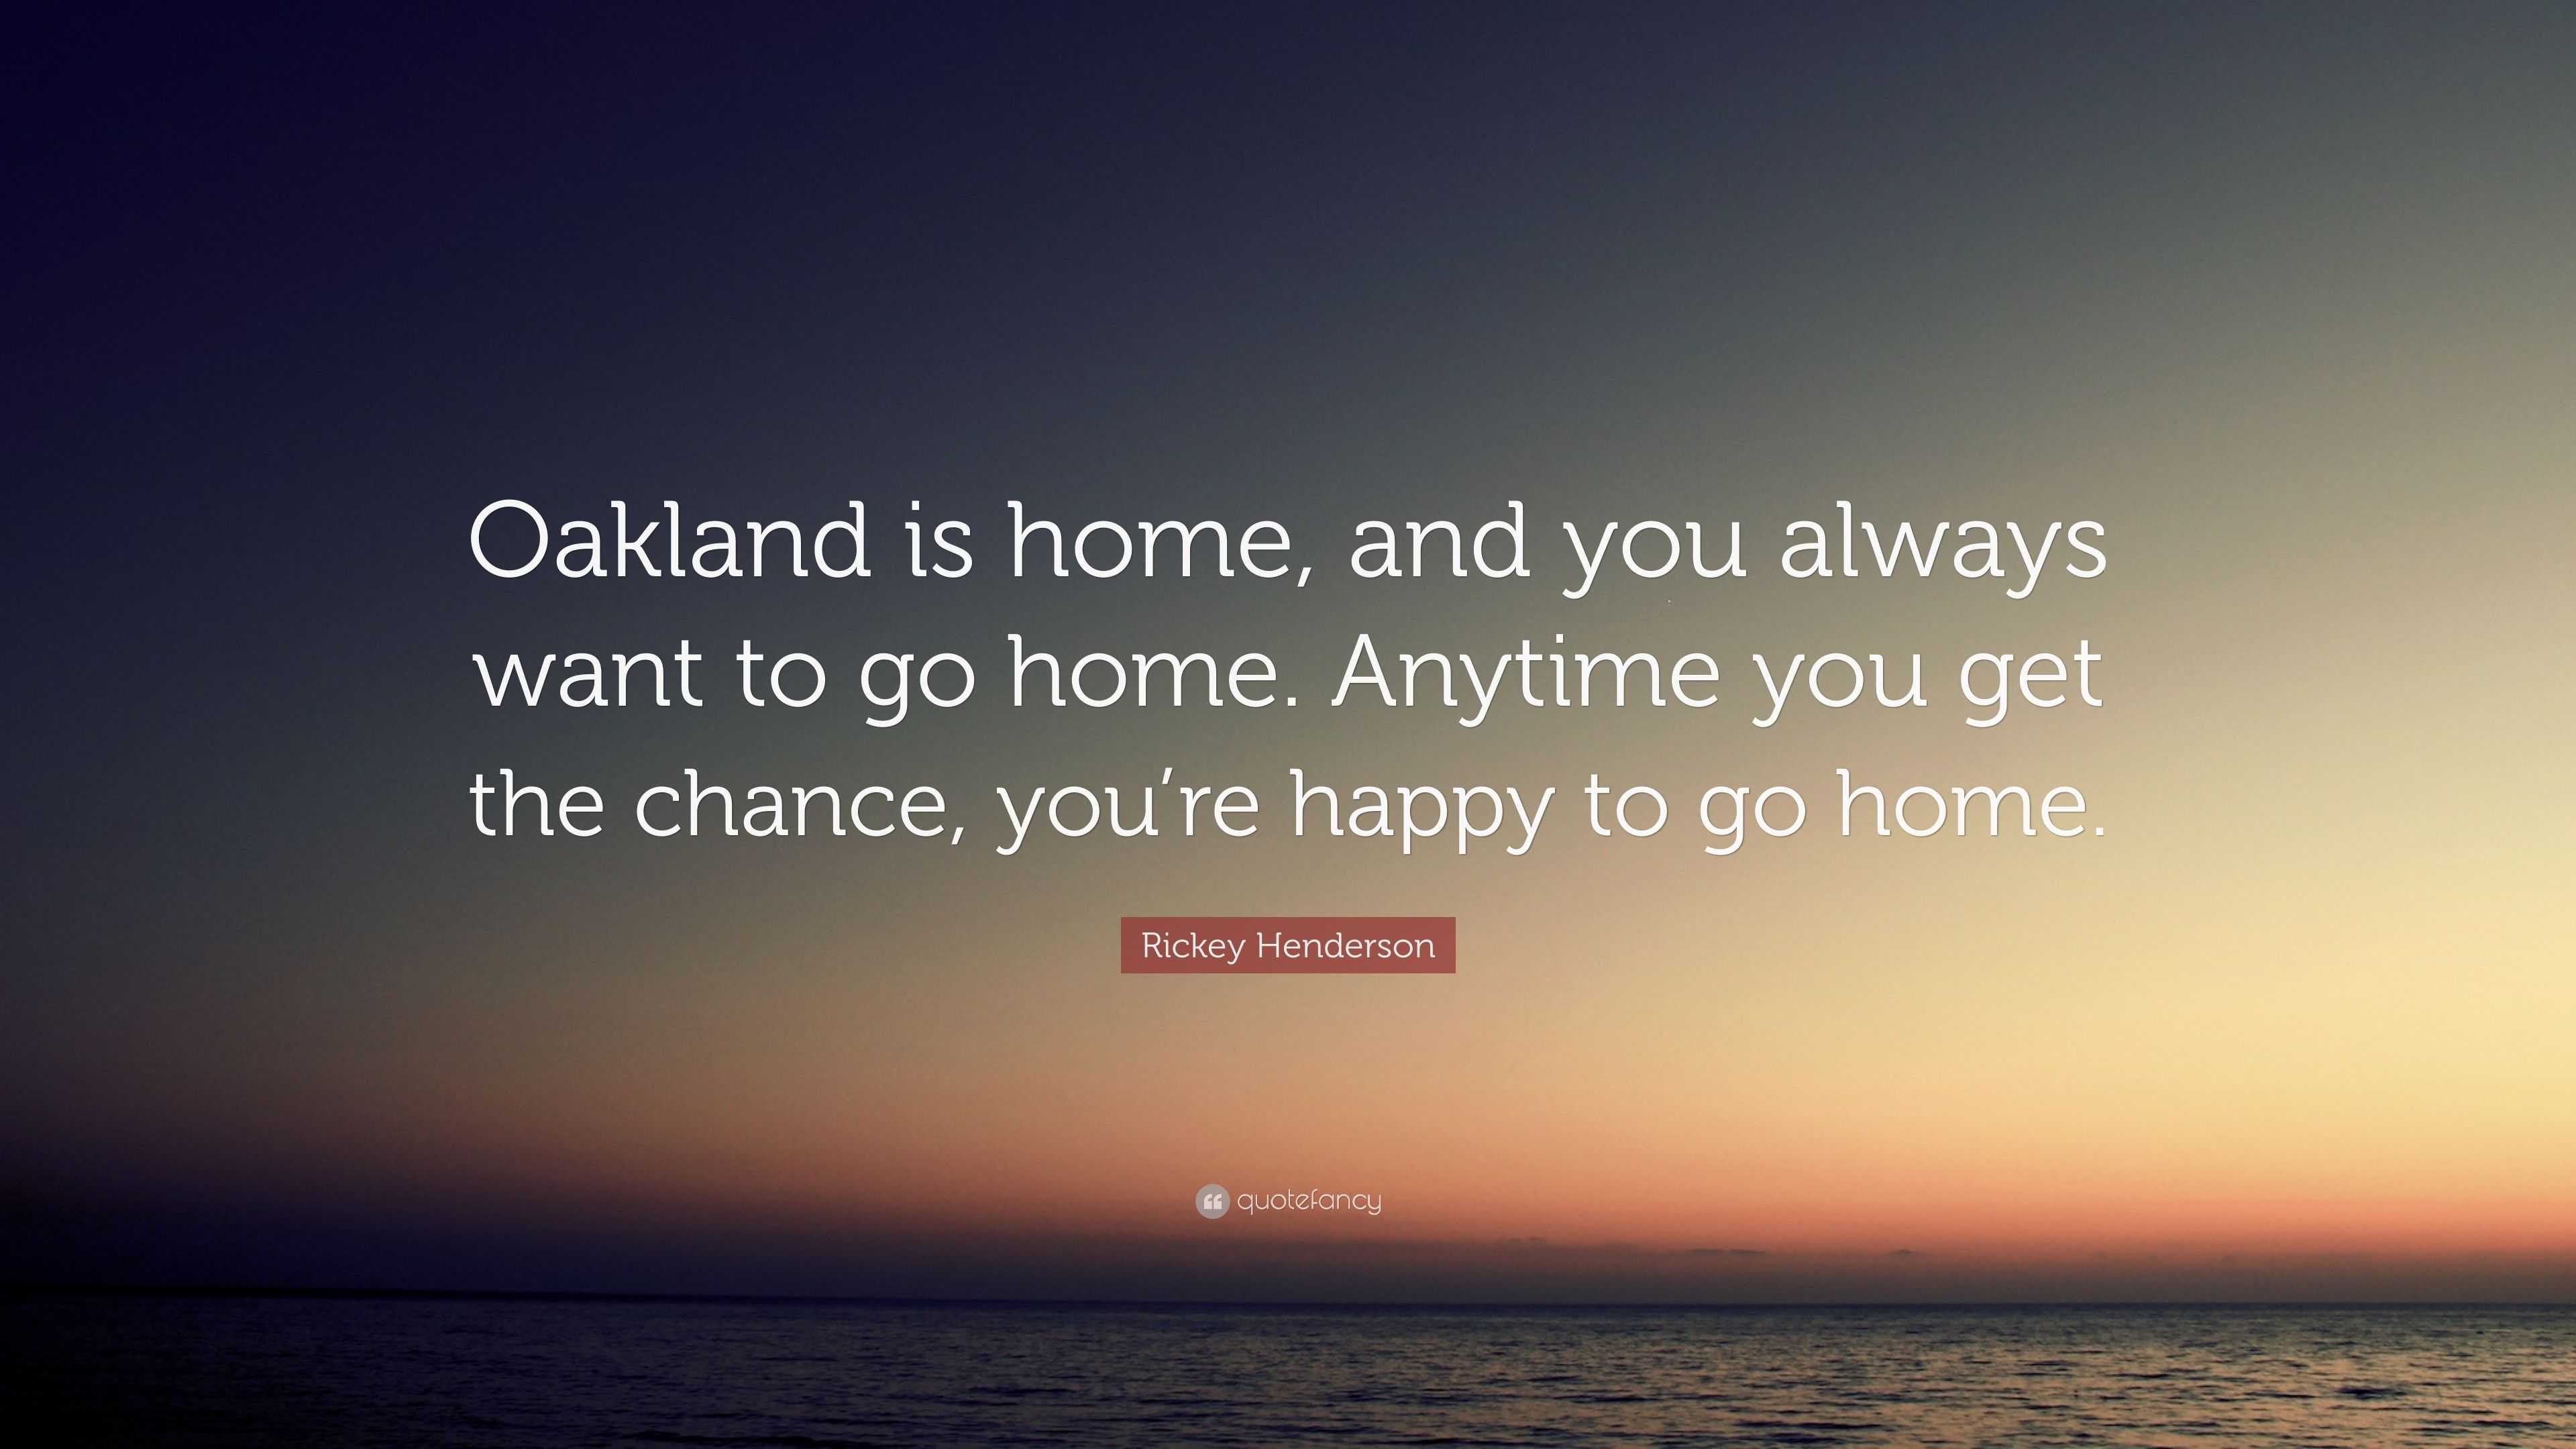 Rickey Henderson Quote Oakland Is Home And You Always Want To Go Home Anytime You Get